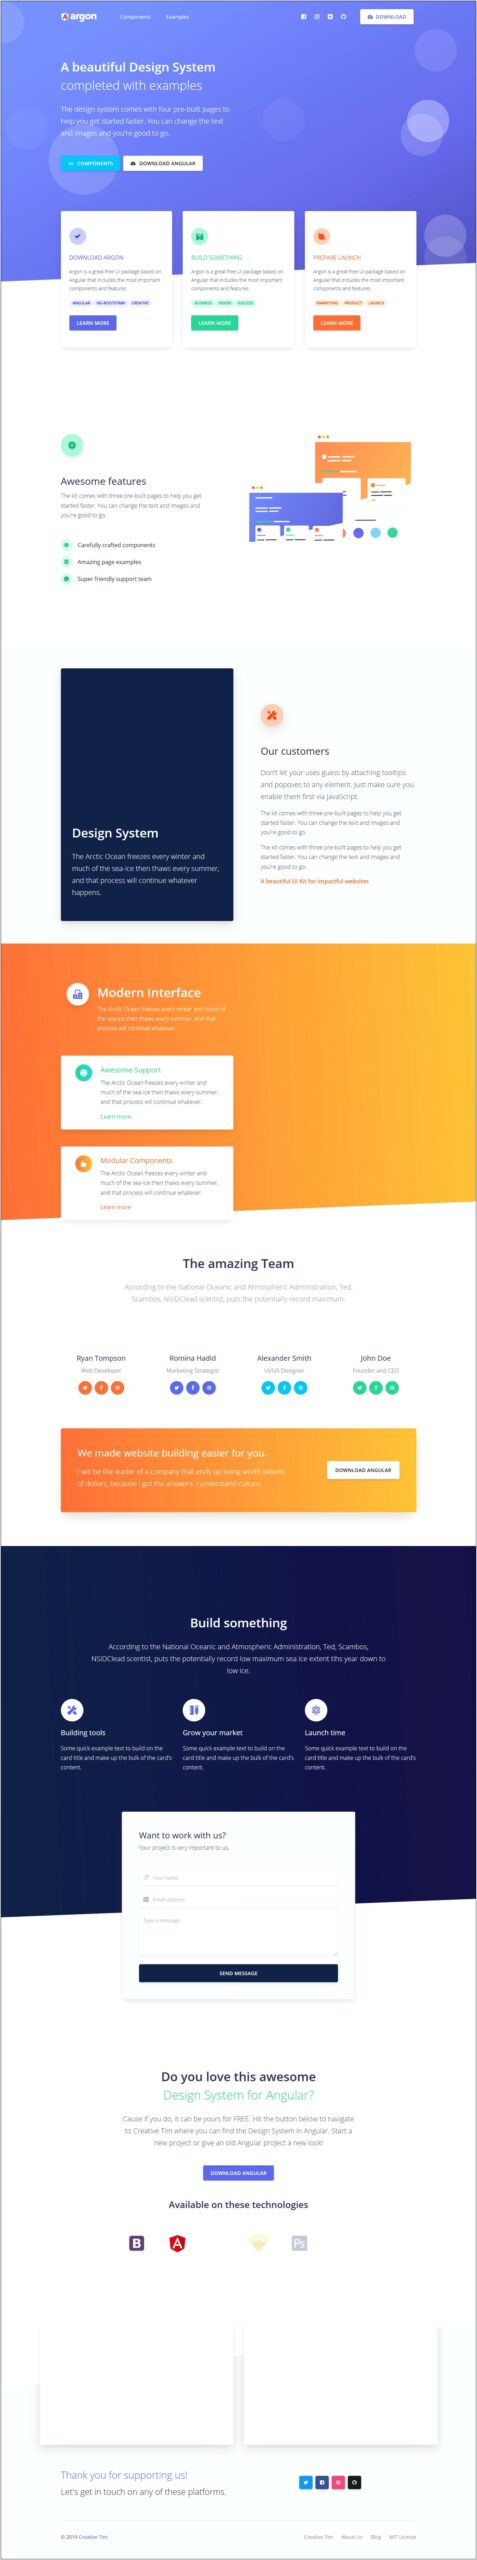 Free Admin Panel Template For Ecommerce